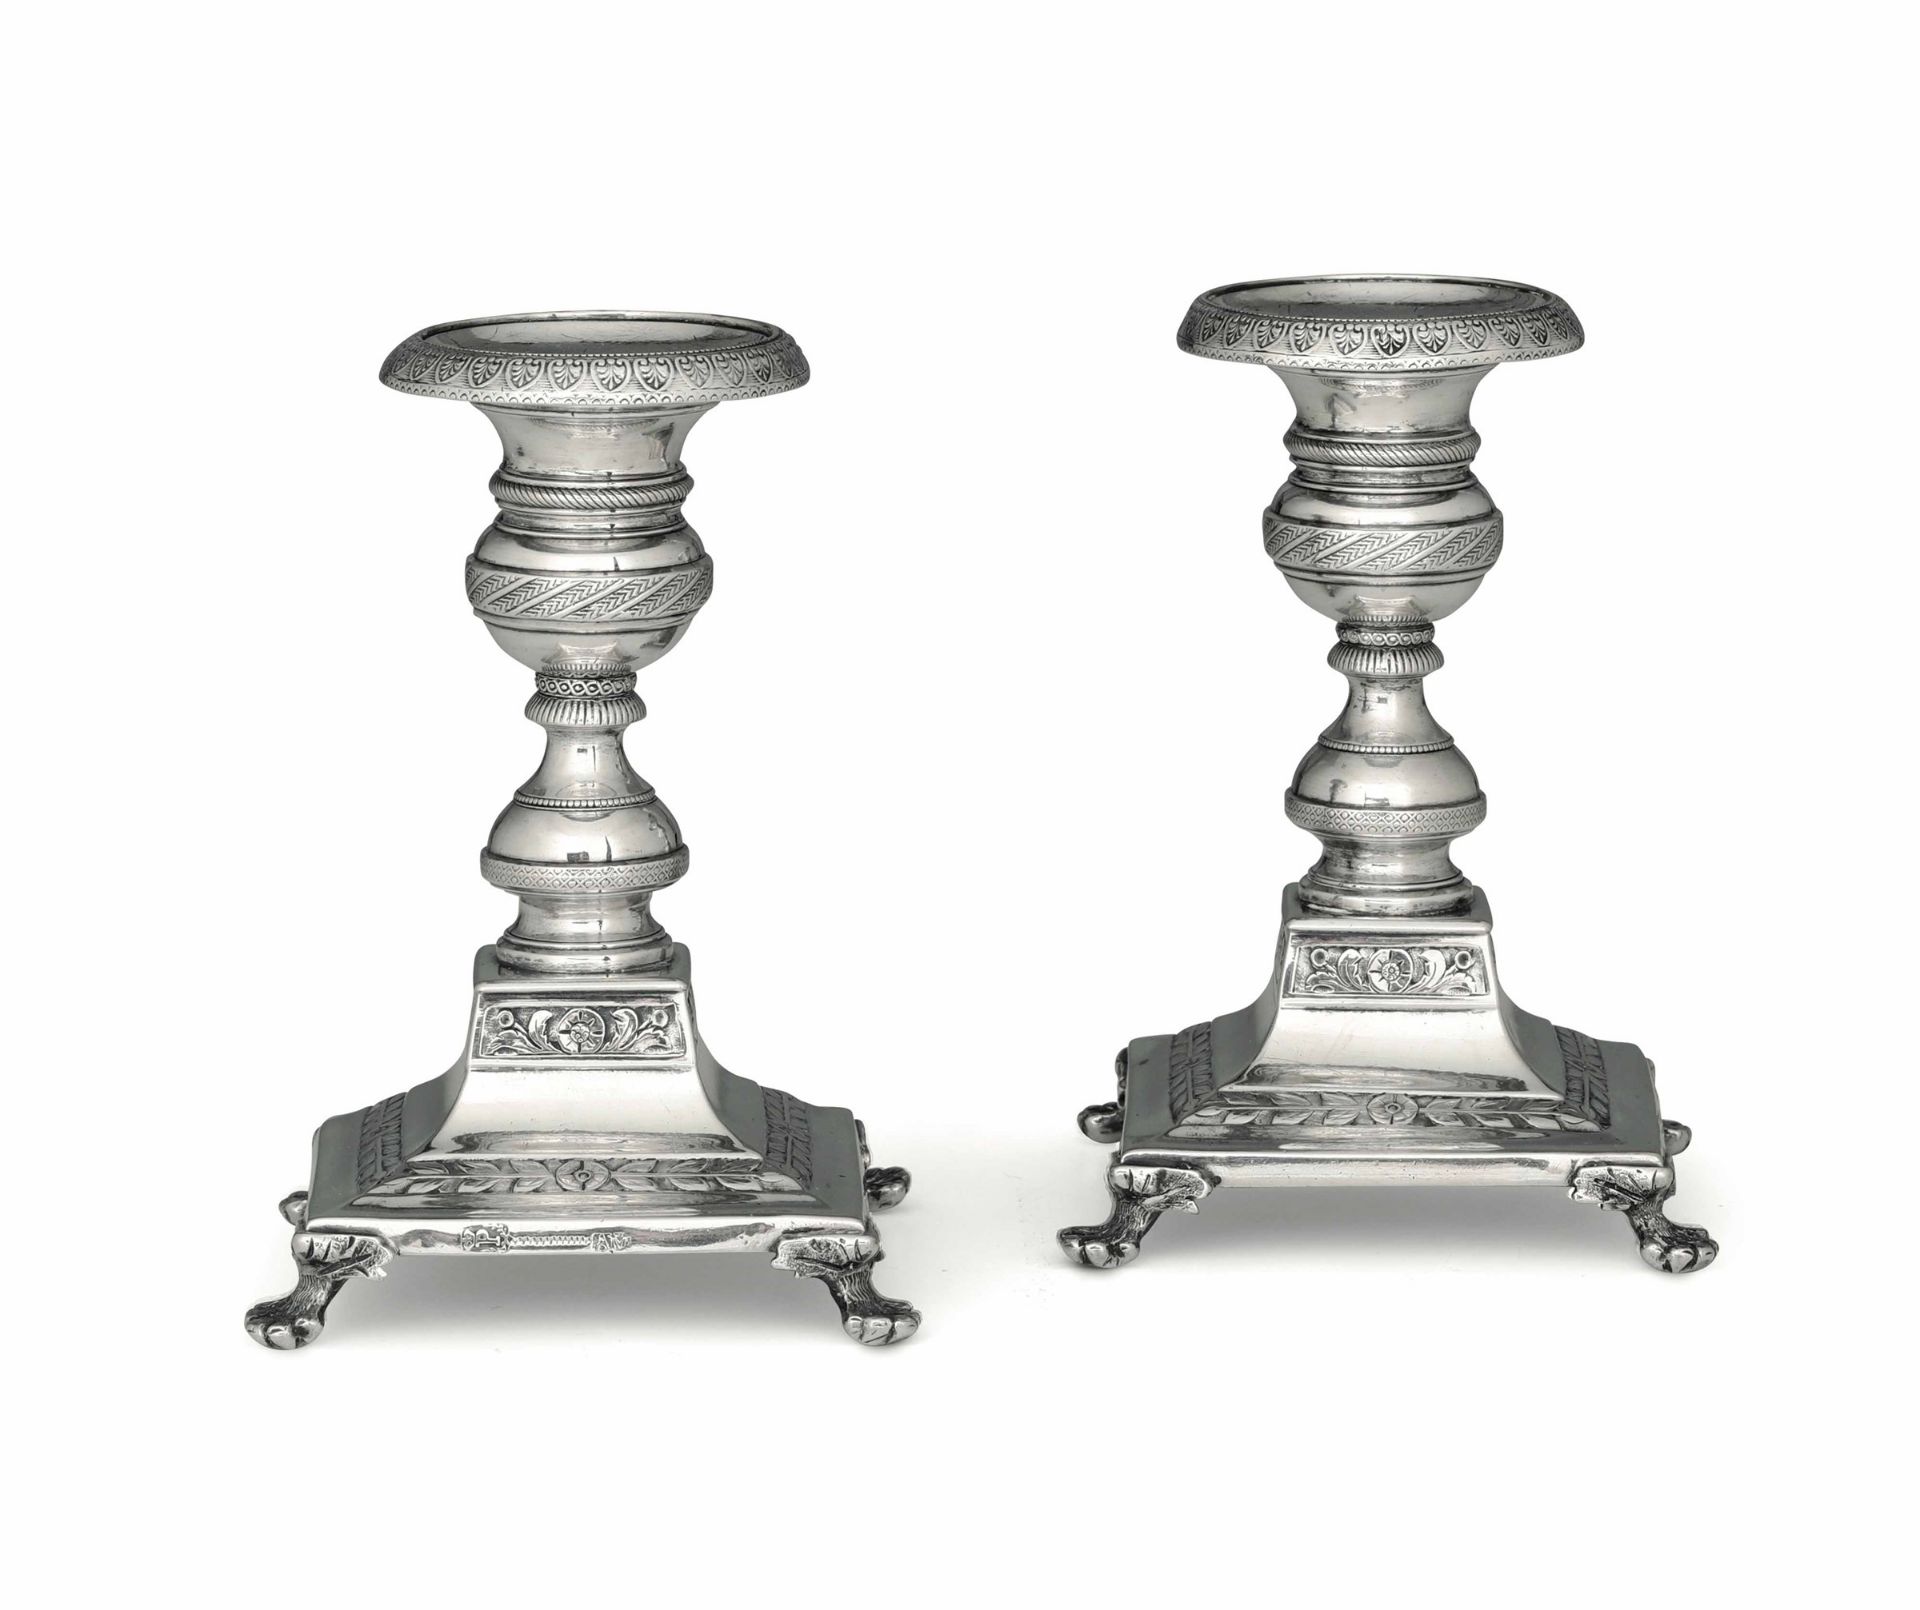 Two silver candlesticks, Portugal 1843/53 - Silversmith AM (unidentified). Molten, [...]